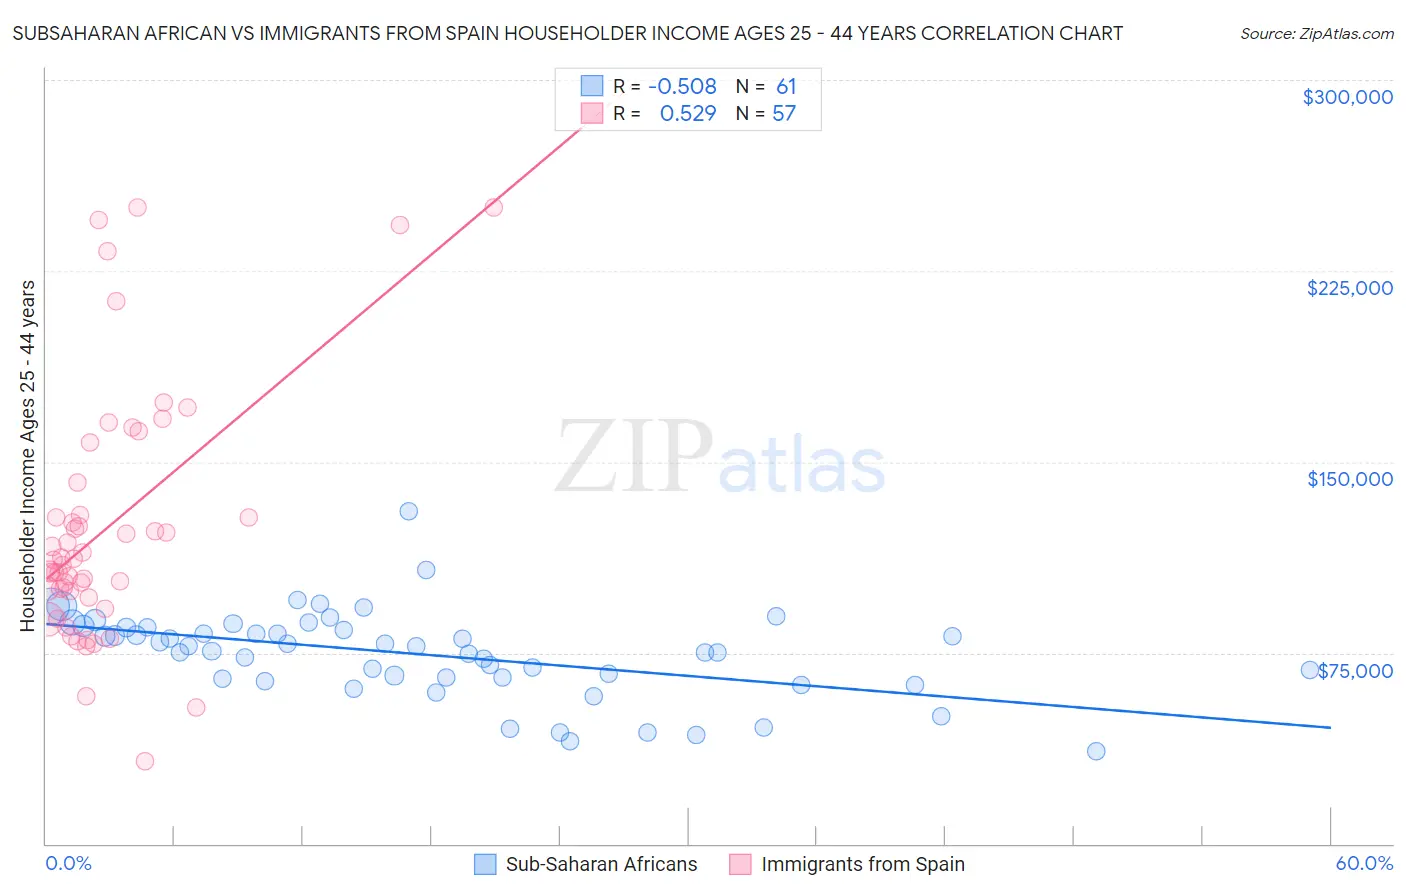 Subsaharan African vs Immigrants from Spain Householder Income Ages 25 - 44 years